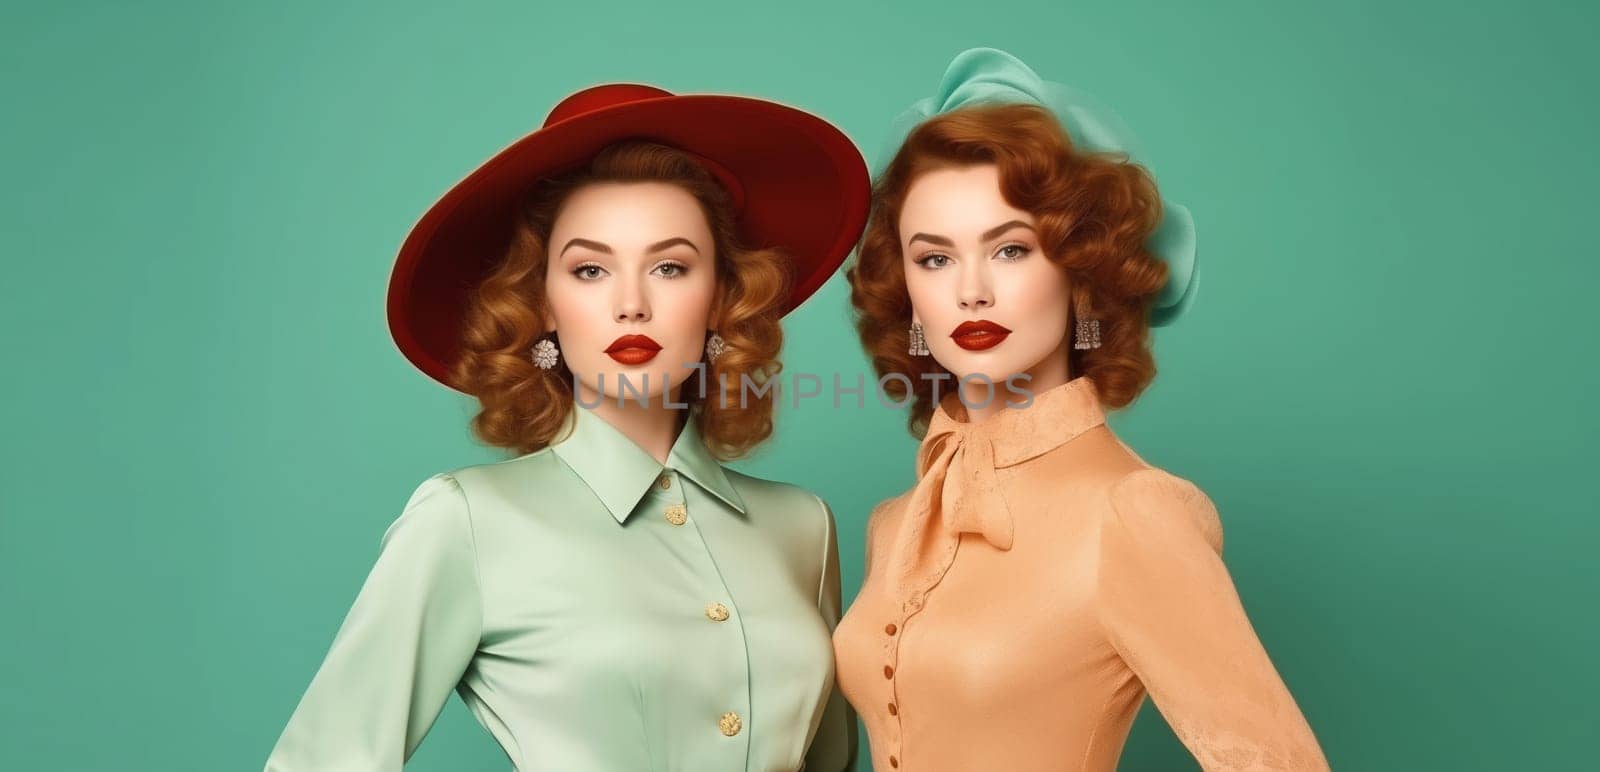 Portrait of two beautiful elegant stylish women ladies in retro style posing on color background